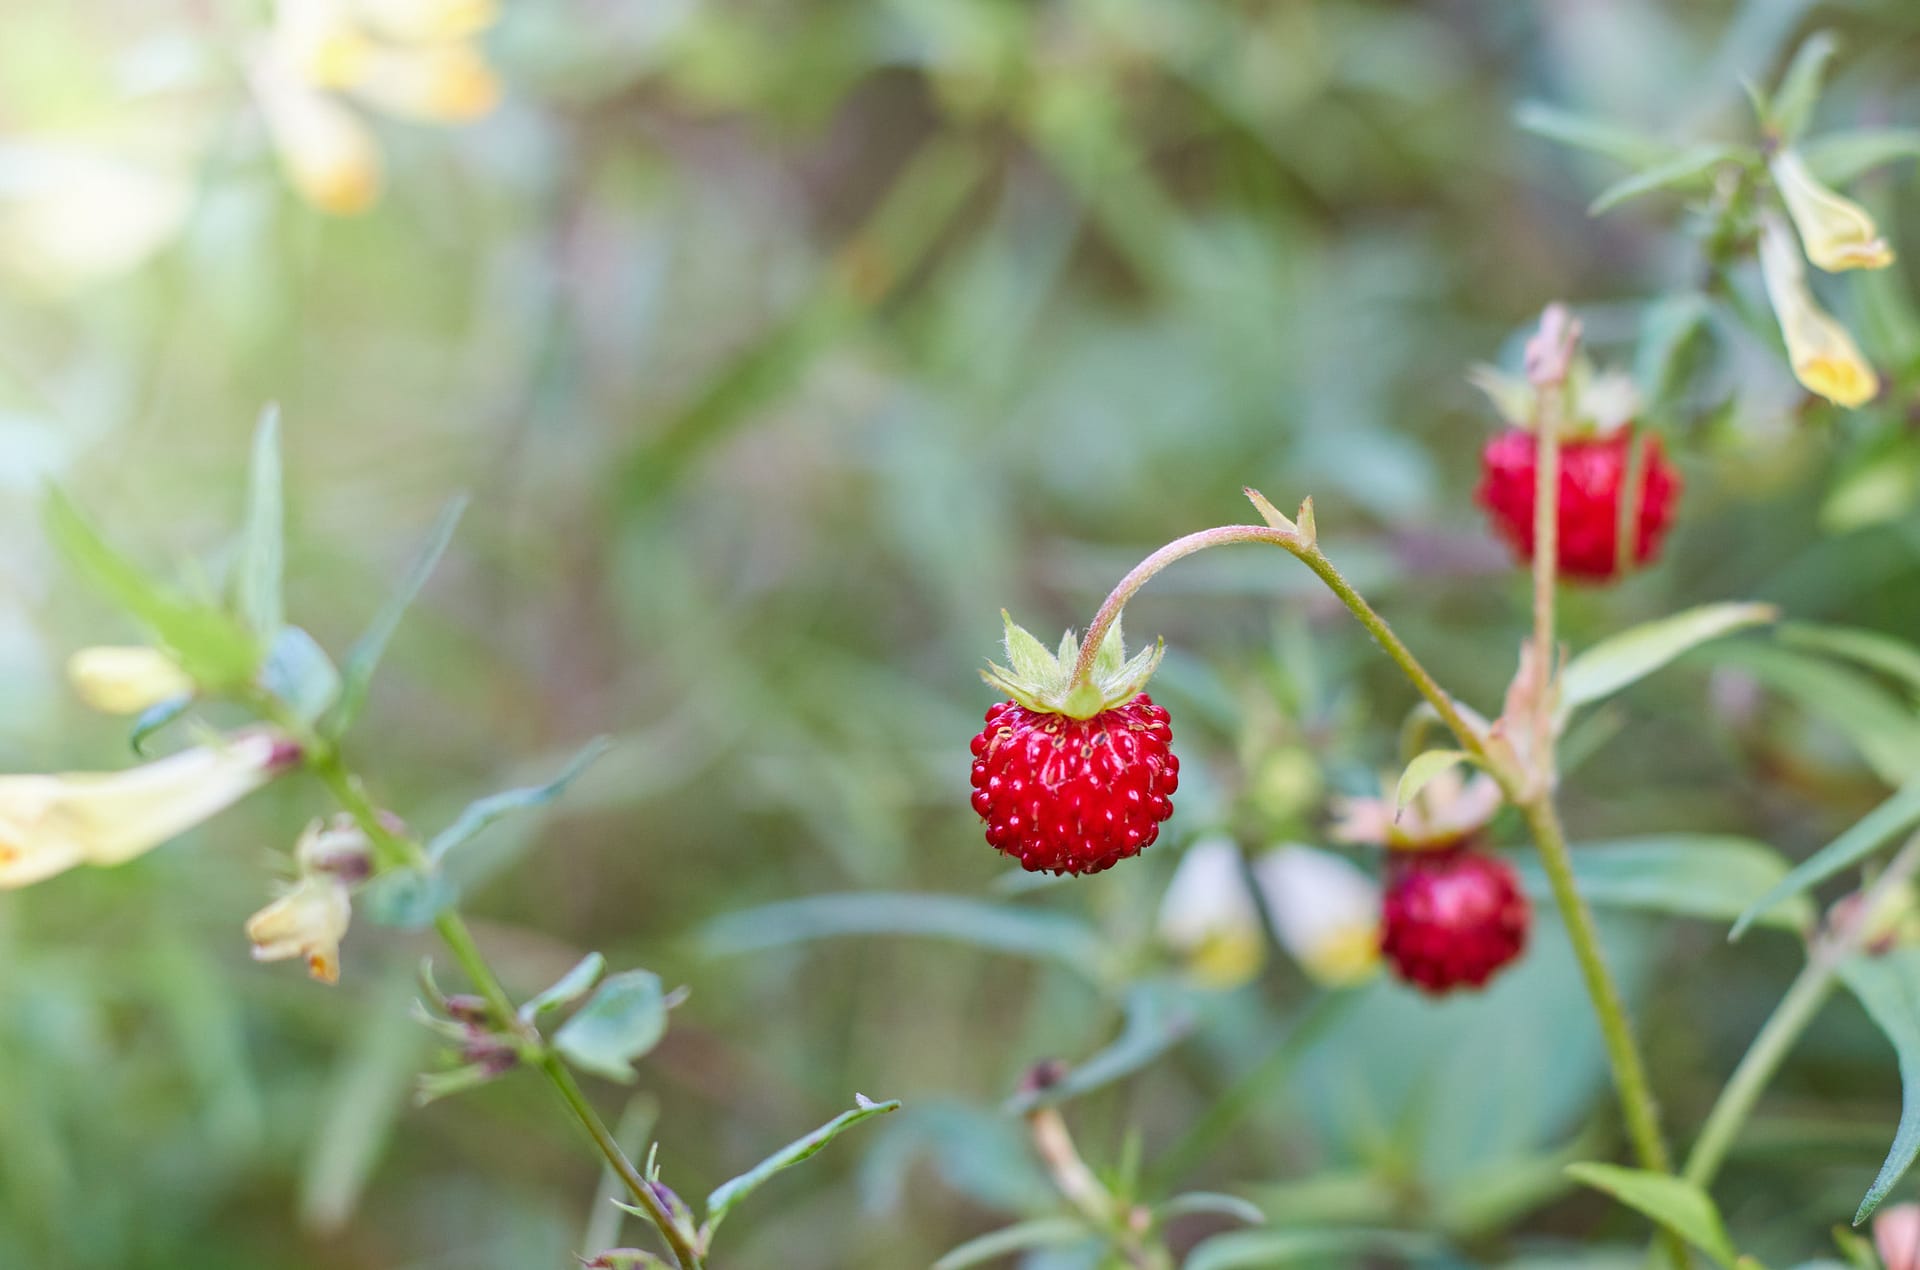 The berry of ripe strawberries in a sunny meadow in the forest.